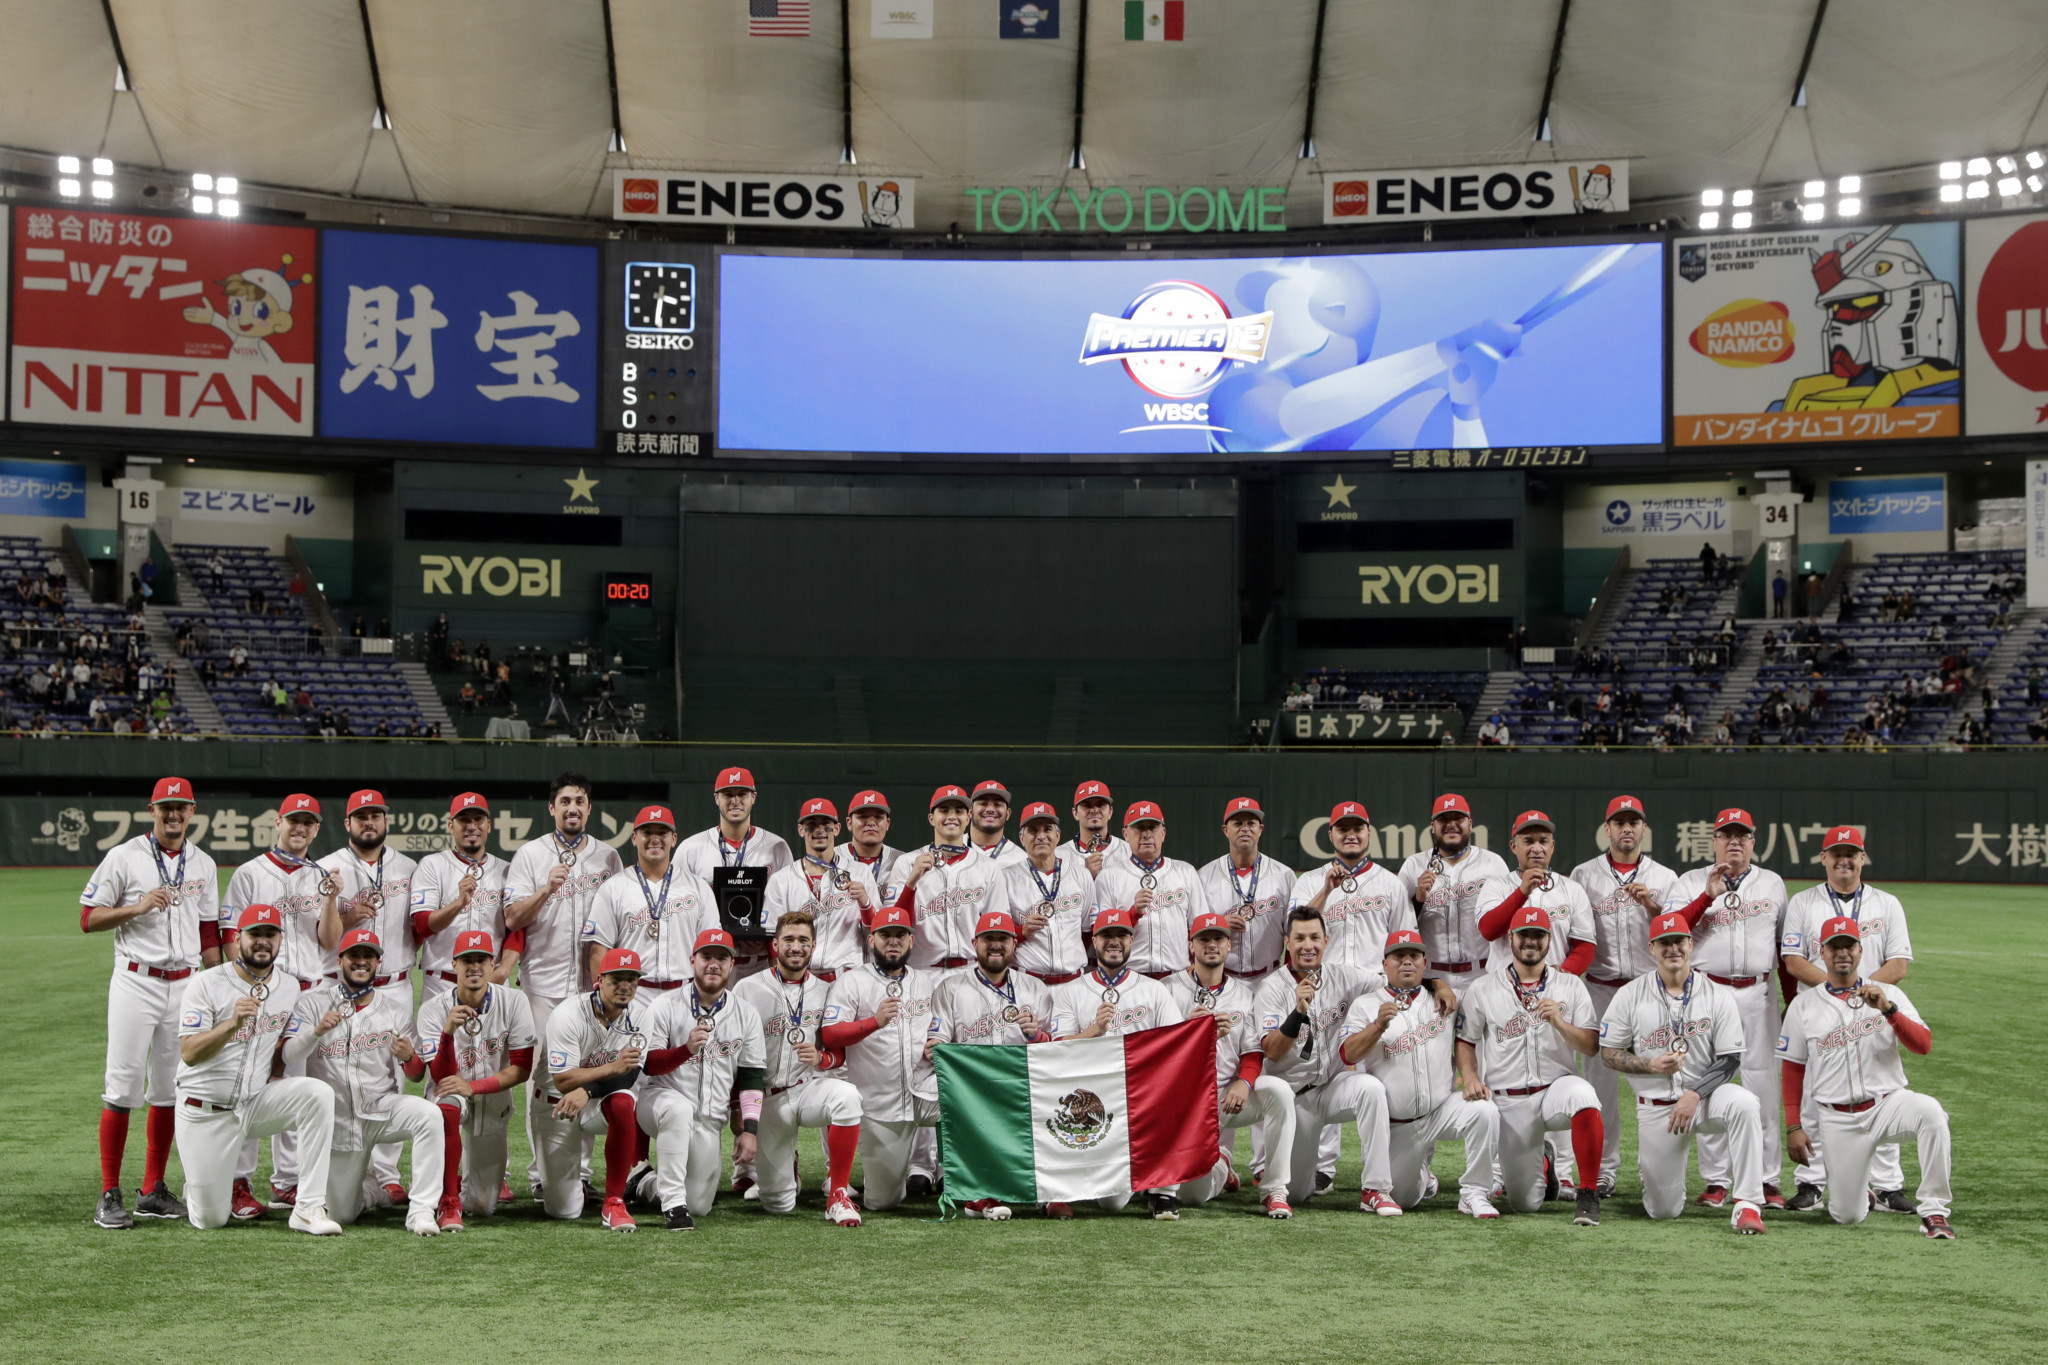 Mexico have qualified for Tokyo 2020 and would be among the countries likely to benefit if a fresh agreement is reached for MLB 40-man roster players to take part ©Getty Images